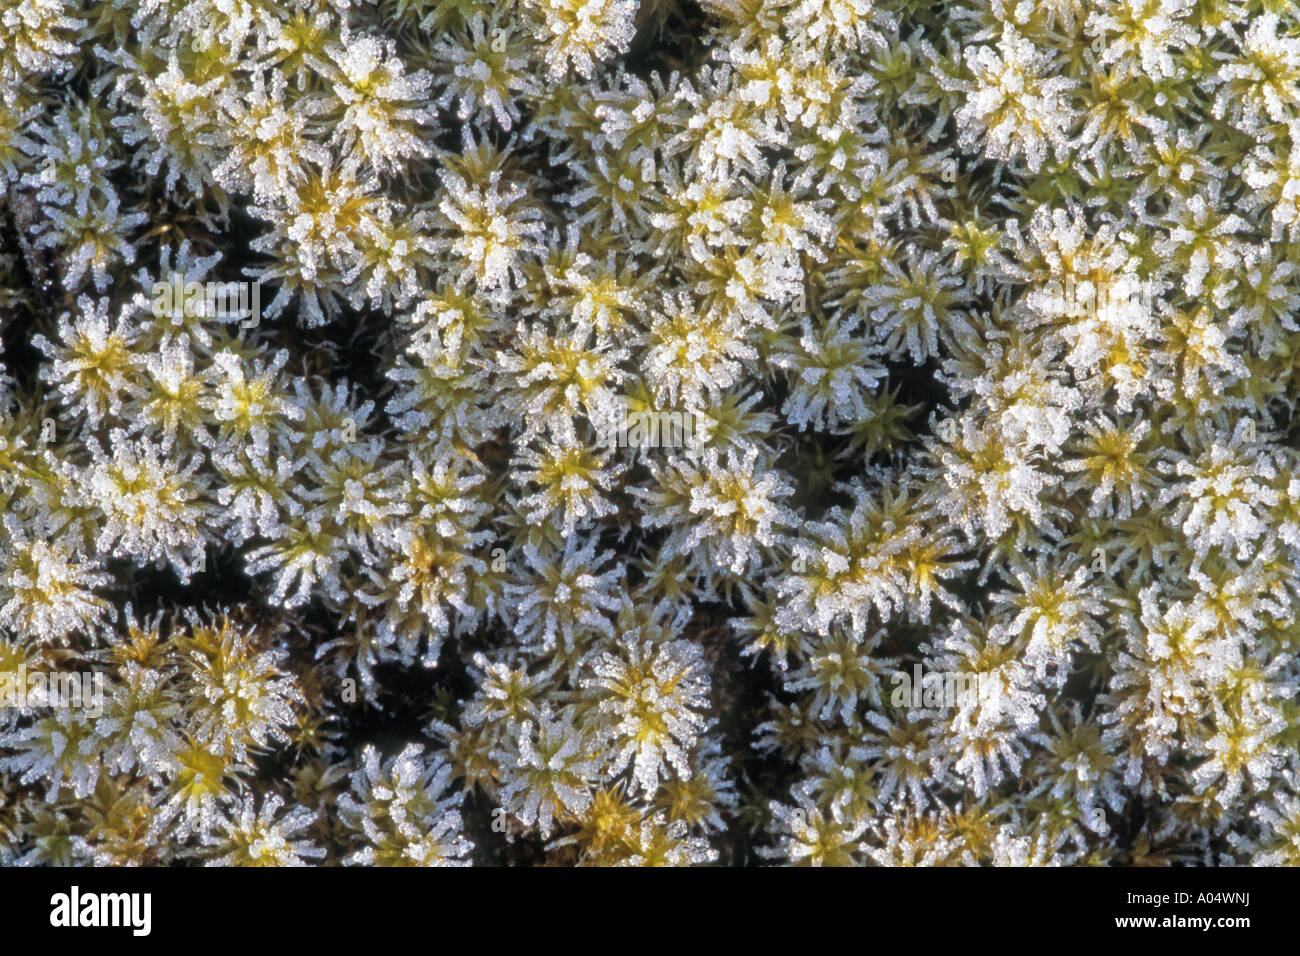 Square Goose neck moss, Springy turf moss (Rhytidiadelphus squarrosus) in hoarfrost seen from above Stock Photo